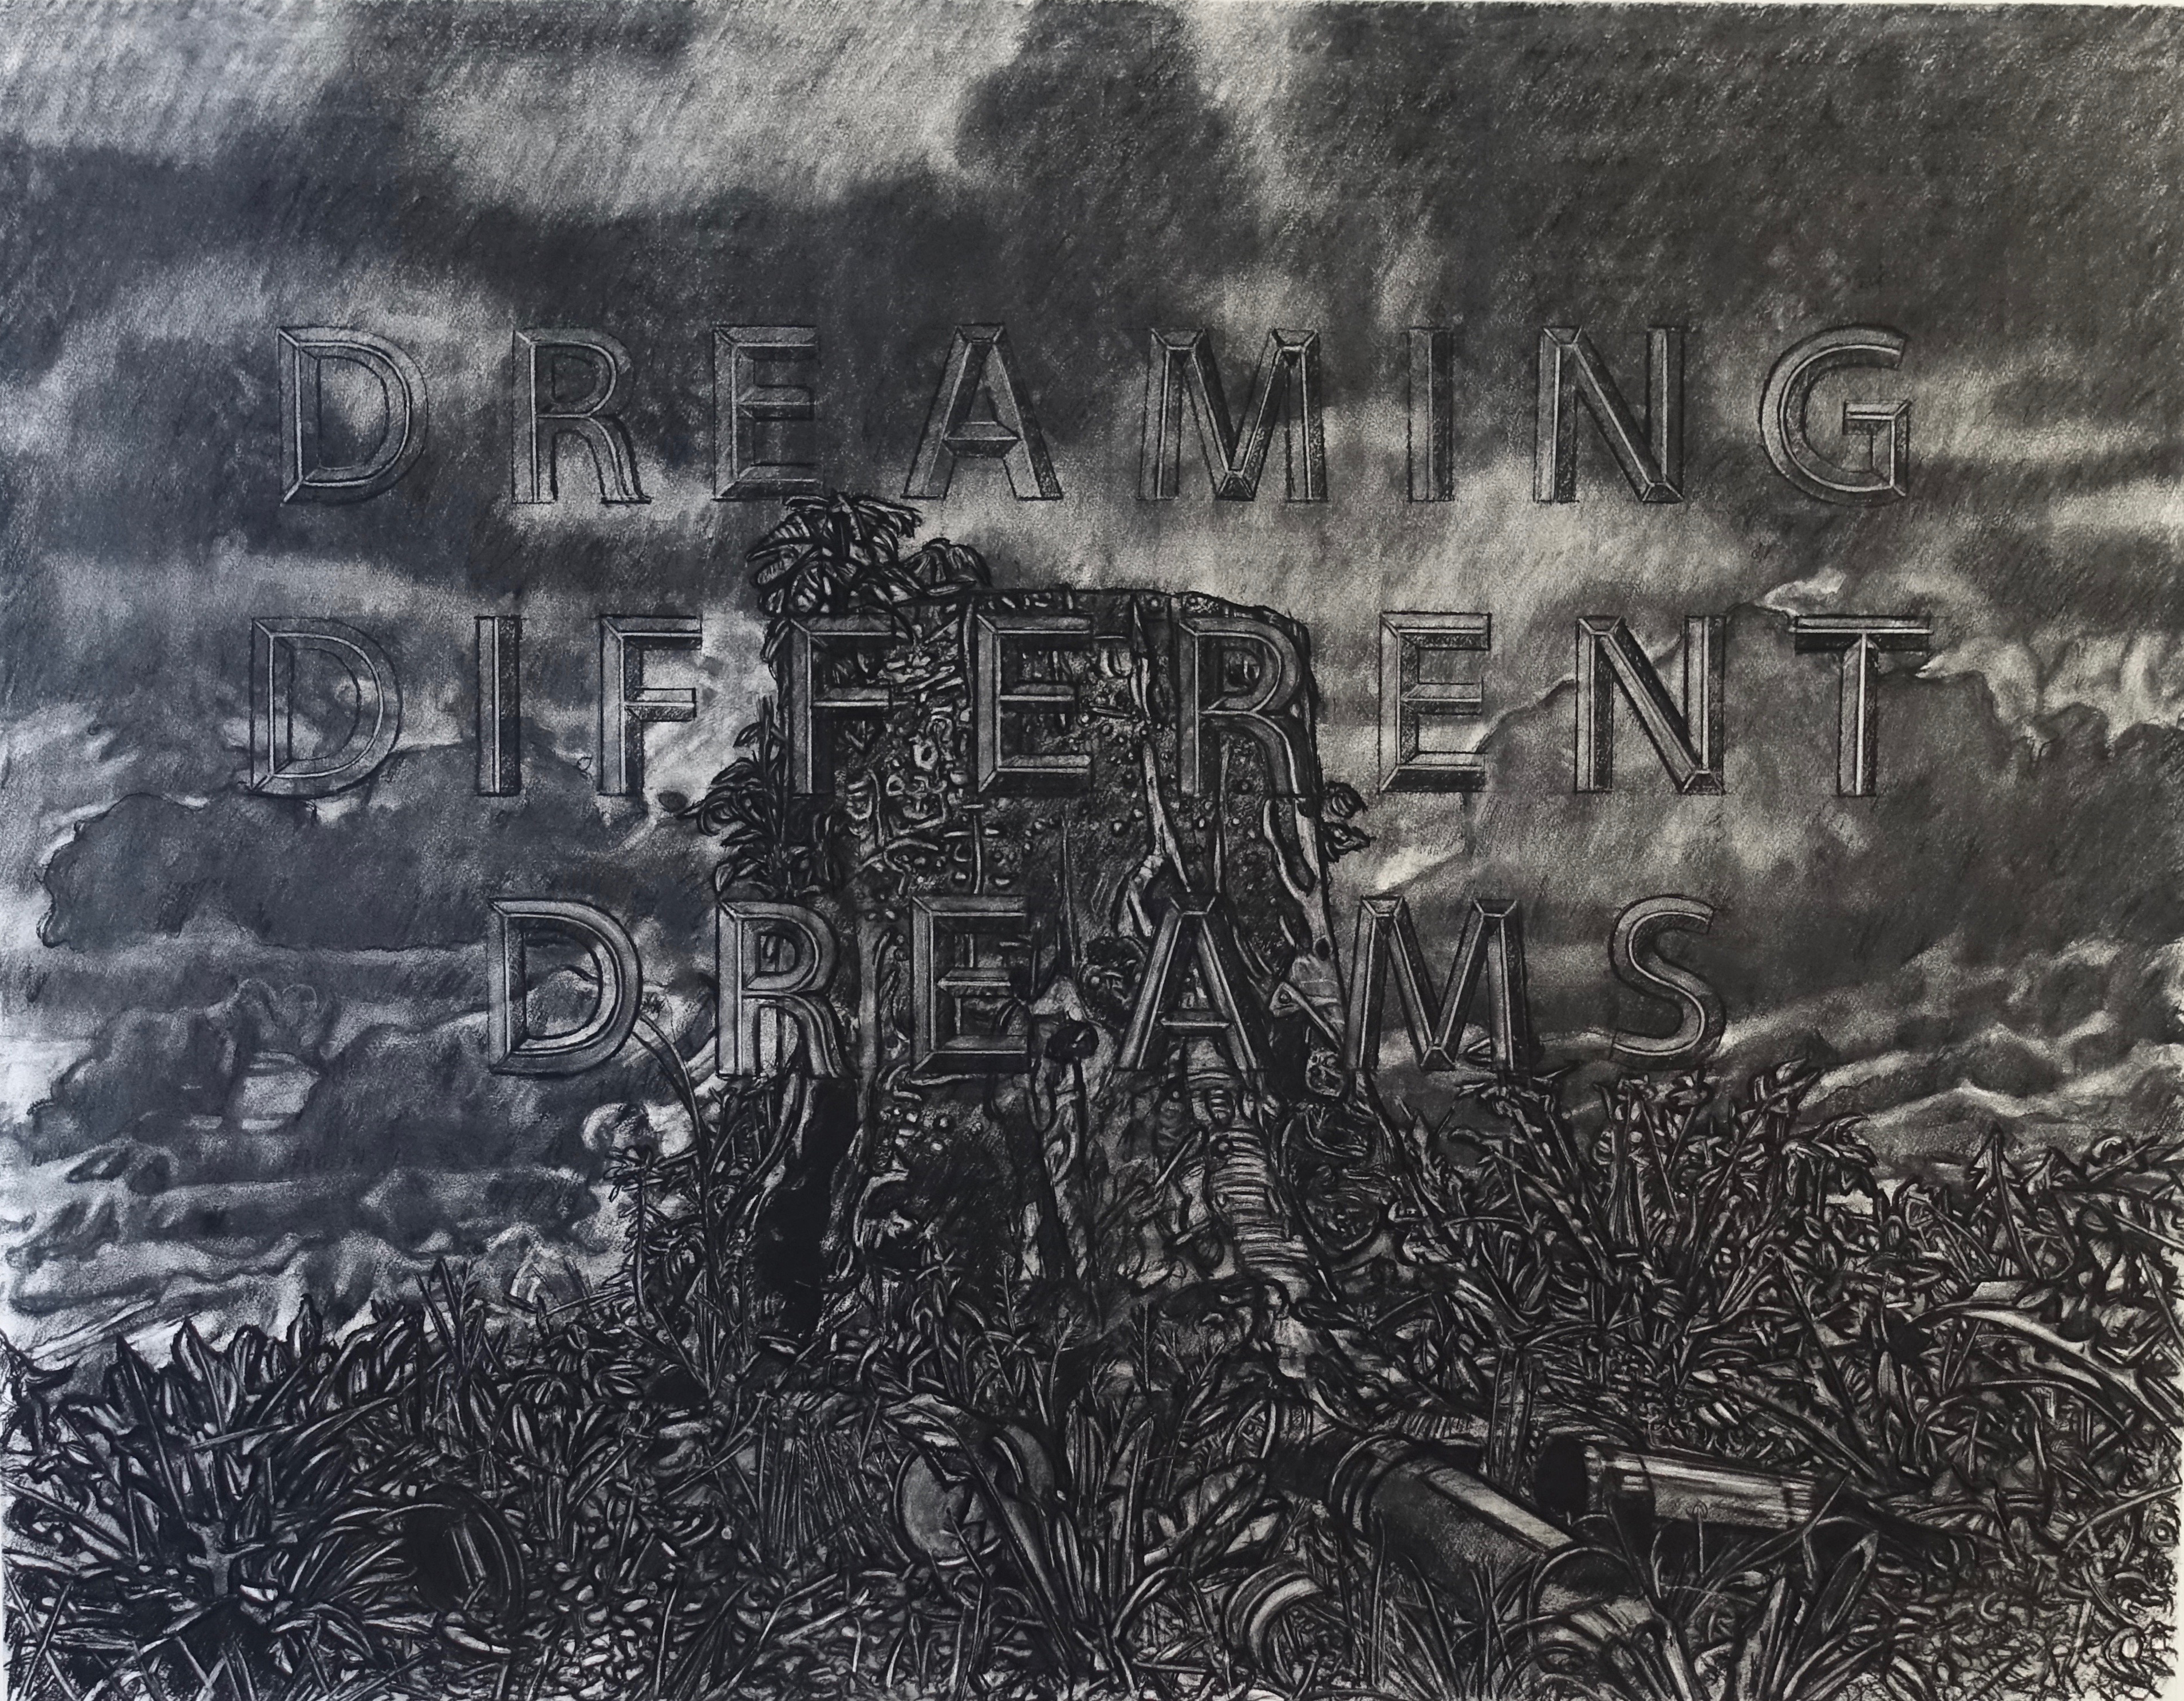 Gary Coyle, Dreaming Different Dreams, charcoal on paper, 153 x 182 cm, 2018-2020 | Gary Coyle: Dreaming Different Dreams | Thursday 5 March – Saturday 27 June 2020 | Kevin Kavanagh